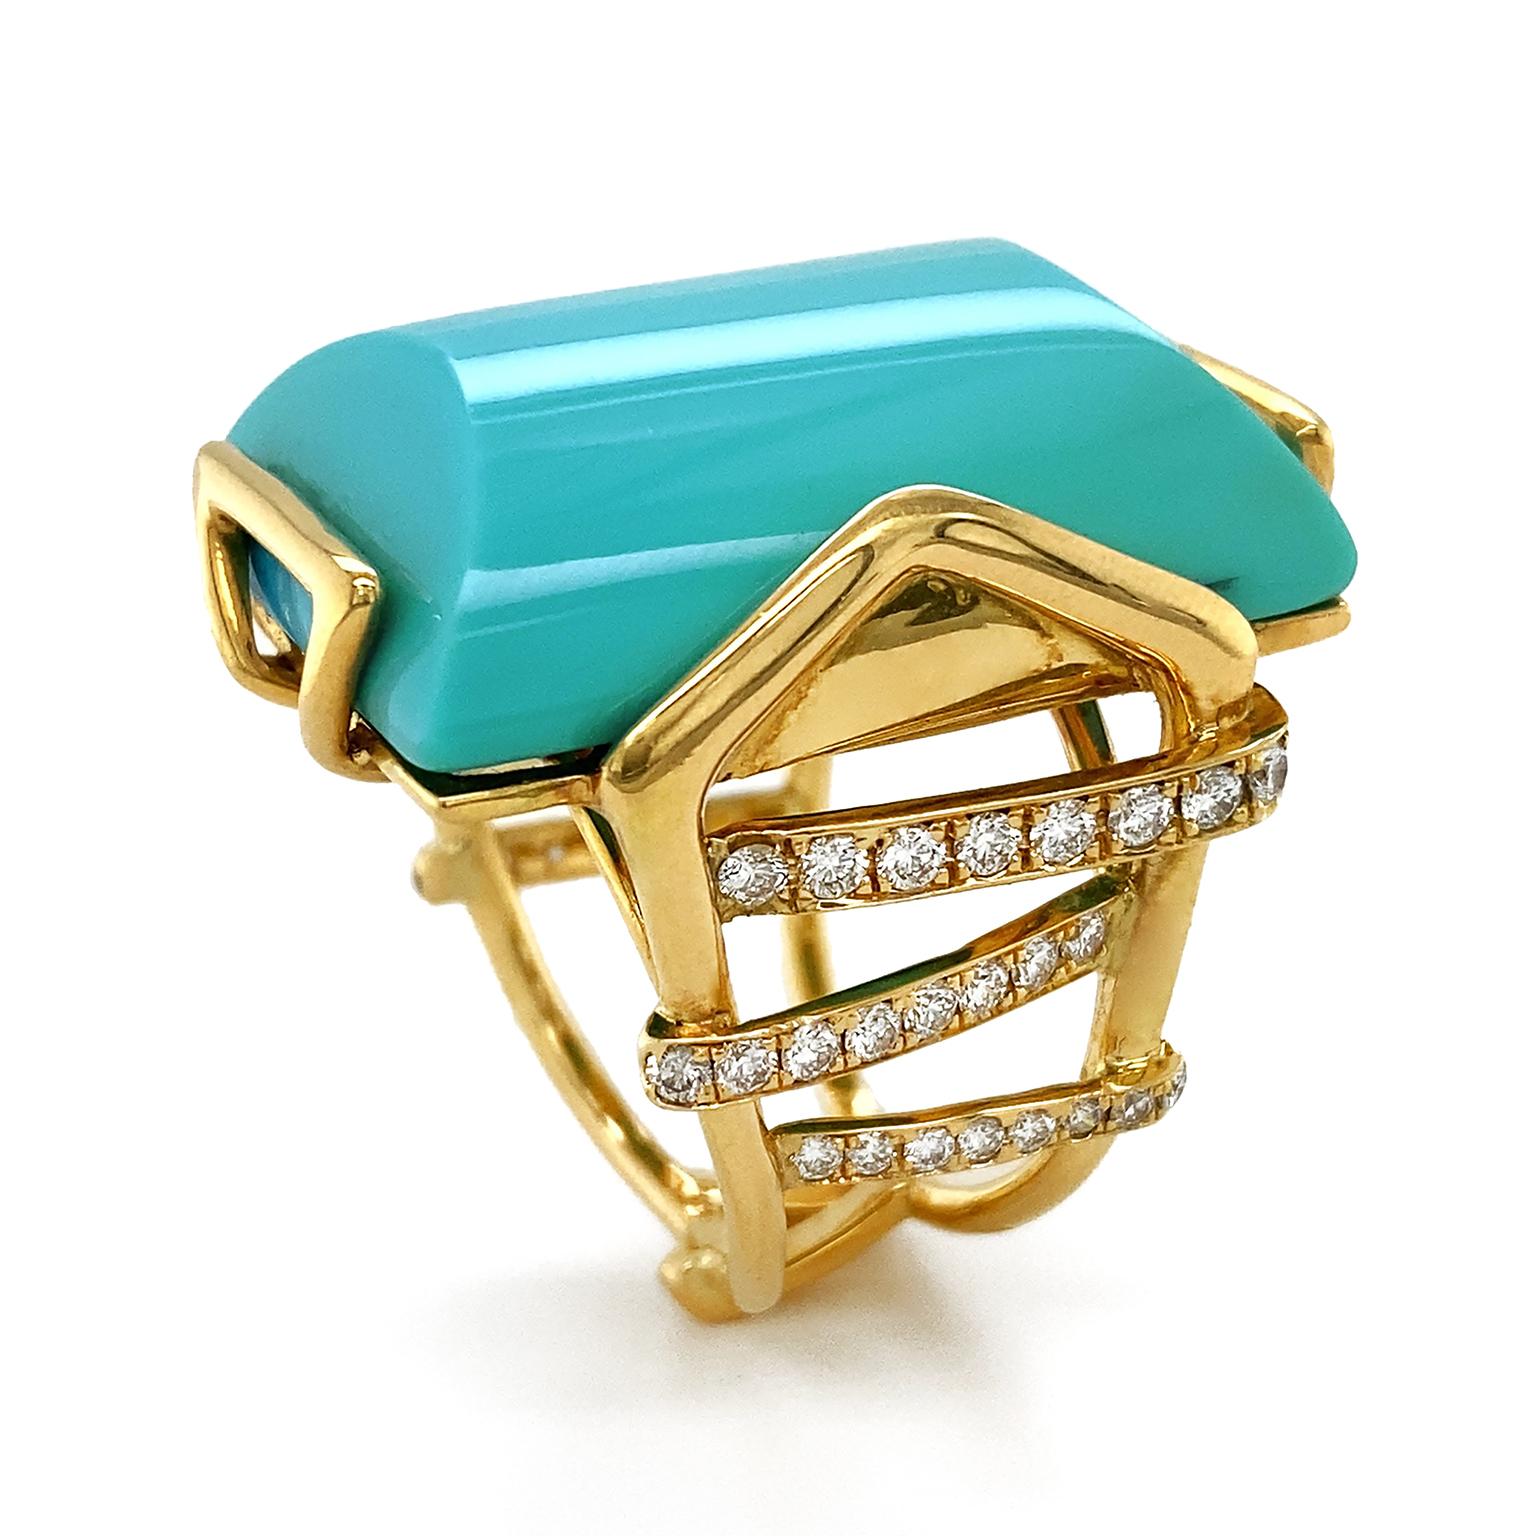 The blue green opacity of turquoise is the culmination of this ring. Its special cut is an elongated cylinder with a curved top and bottom. 18k yellow gold triangular shaped prongs secure the gem and lead to a multi split band. More gold strands